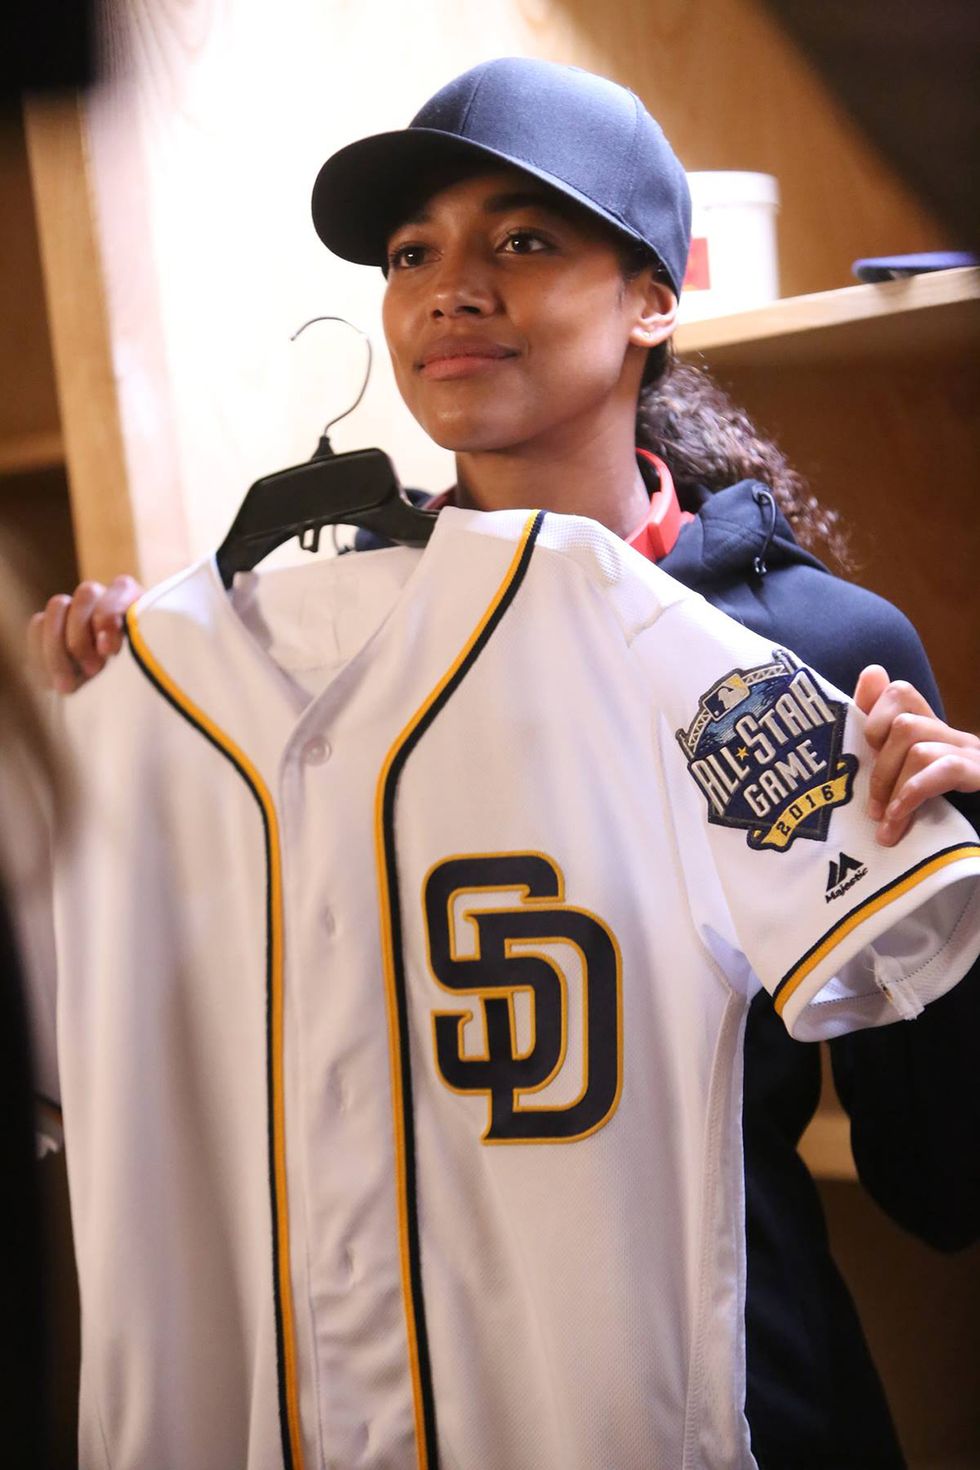 <p>Ginny Baker (Kylie Bunbury) becomes the first woman to play for the MLB when she joins the San Diego Padres.</p><p><em data-redactor-tag="em"><a href="https://www.youtube.com/watch?v=k0wLCGwYZ3g" target="_blank">Pitch</a></em><span class="redactor-invisible-space" data-verified="redactor" data-redactor-tag="span" data-redactor-class="redactor-invisible-space"> airs Thursdays at 9 PM EST on FOX.</span><br></p>